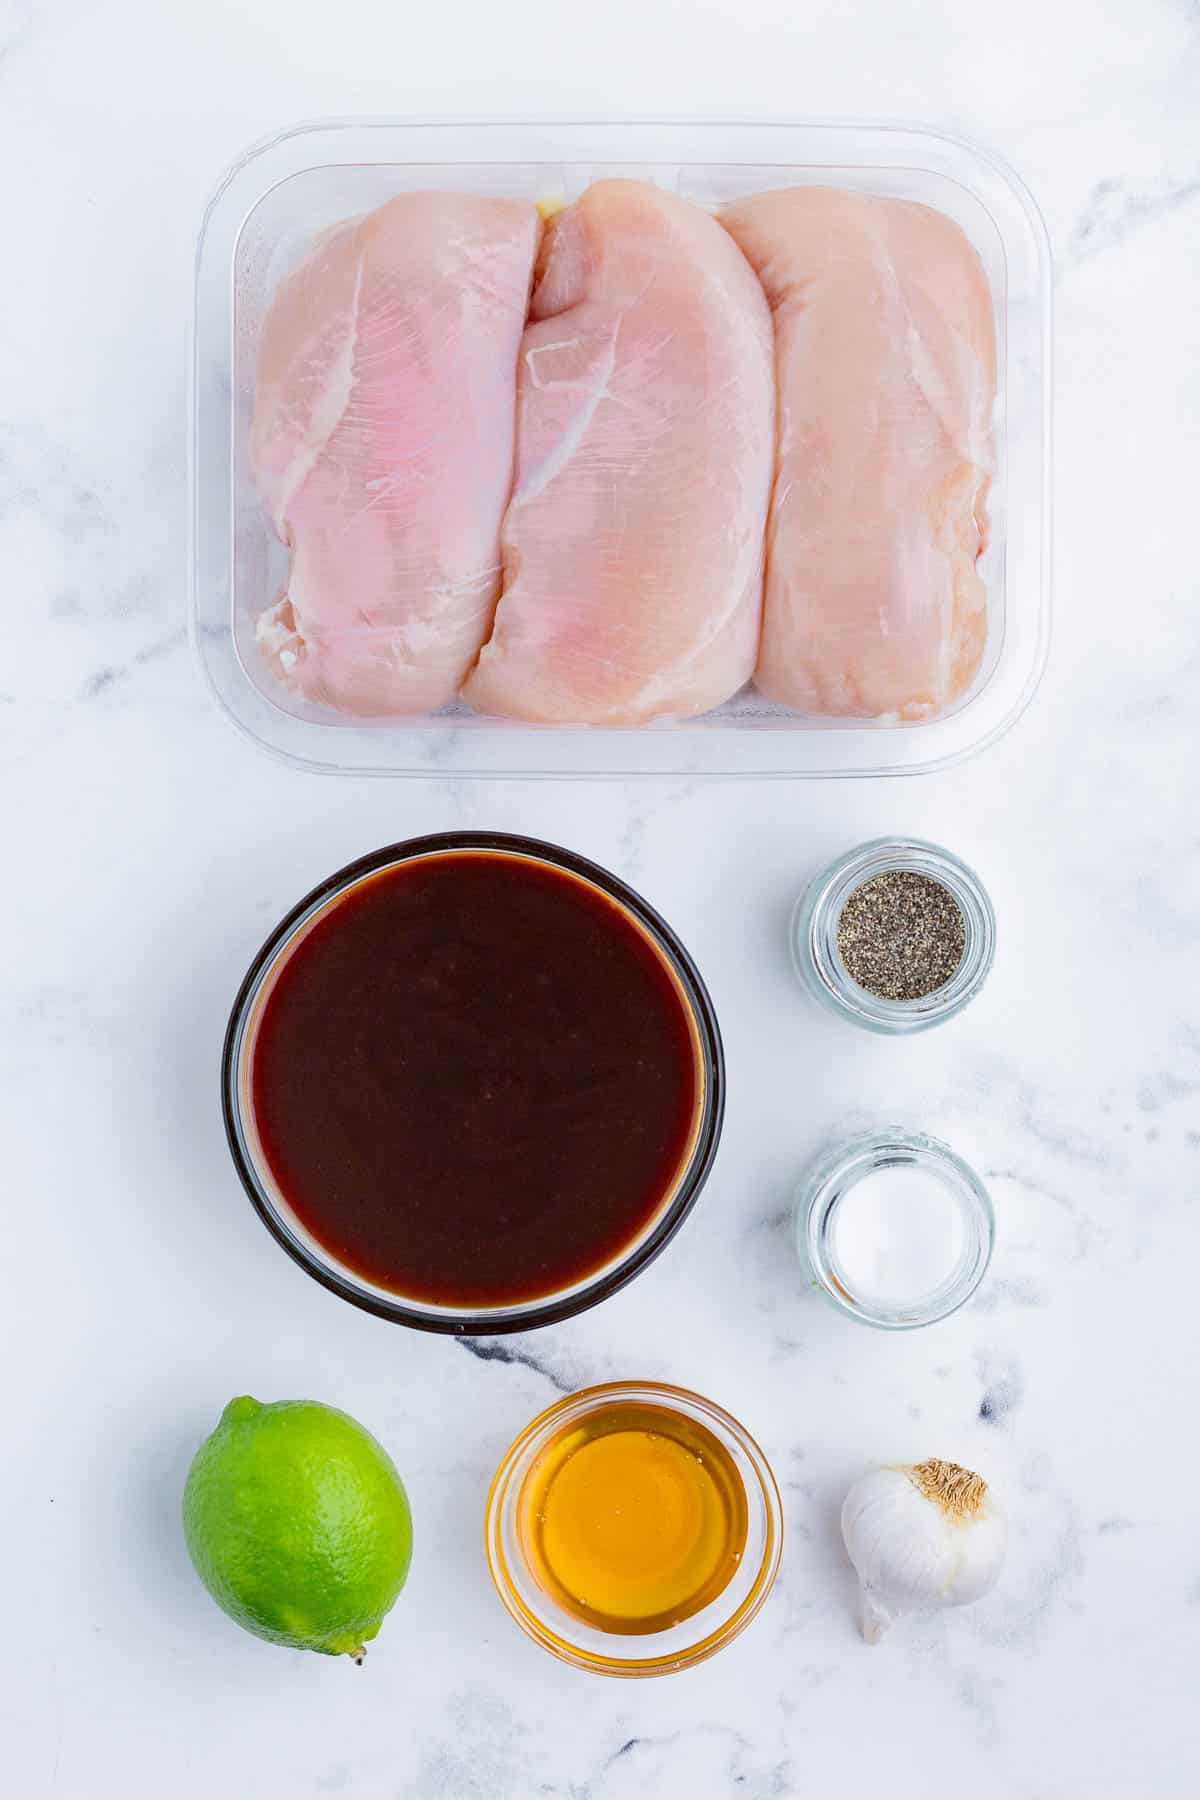 Chicken breasts, bbq sauce, honey, lime juice, and seasonings are the ingredients for this dish.